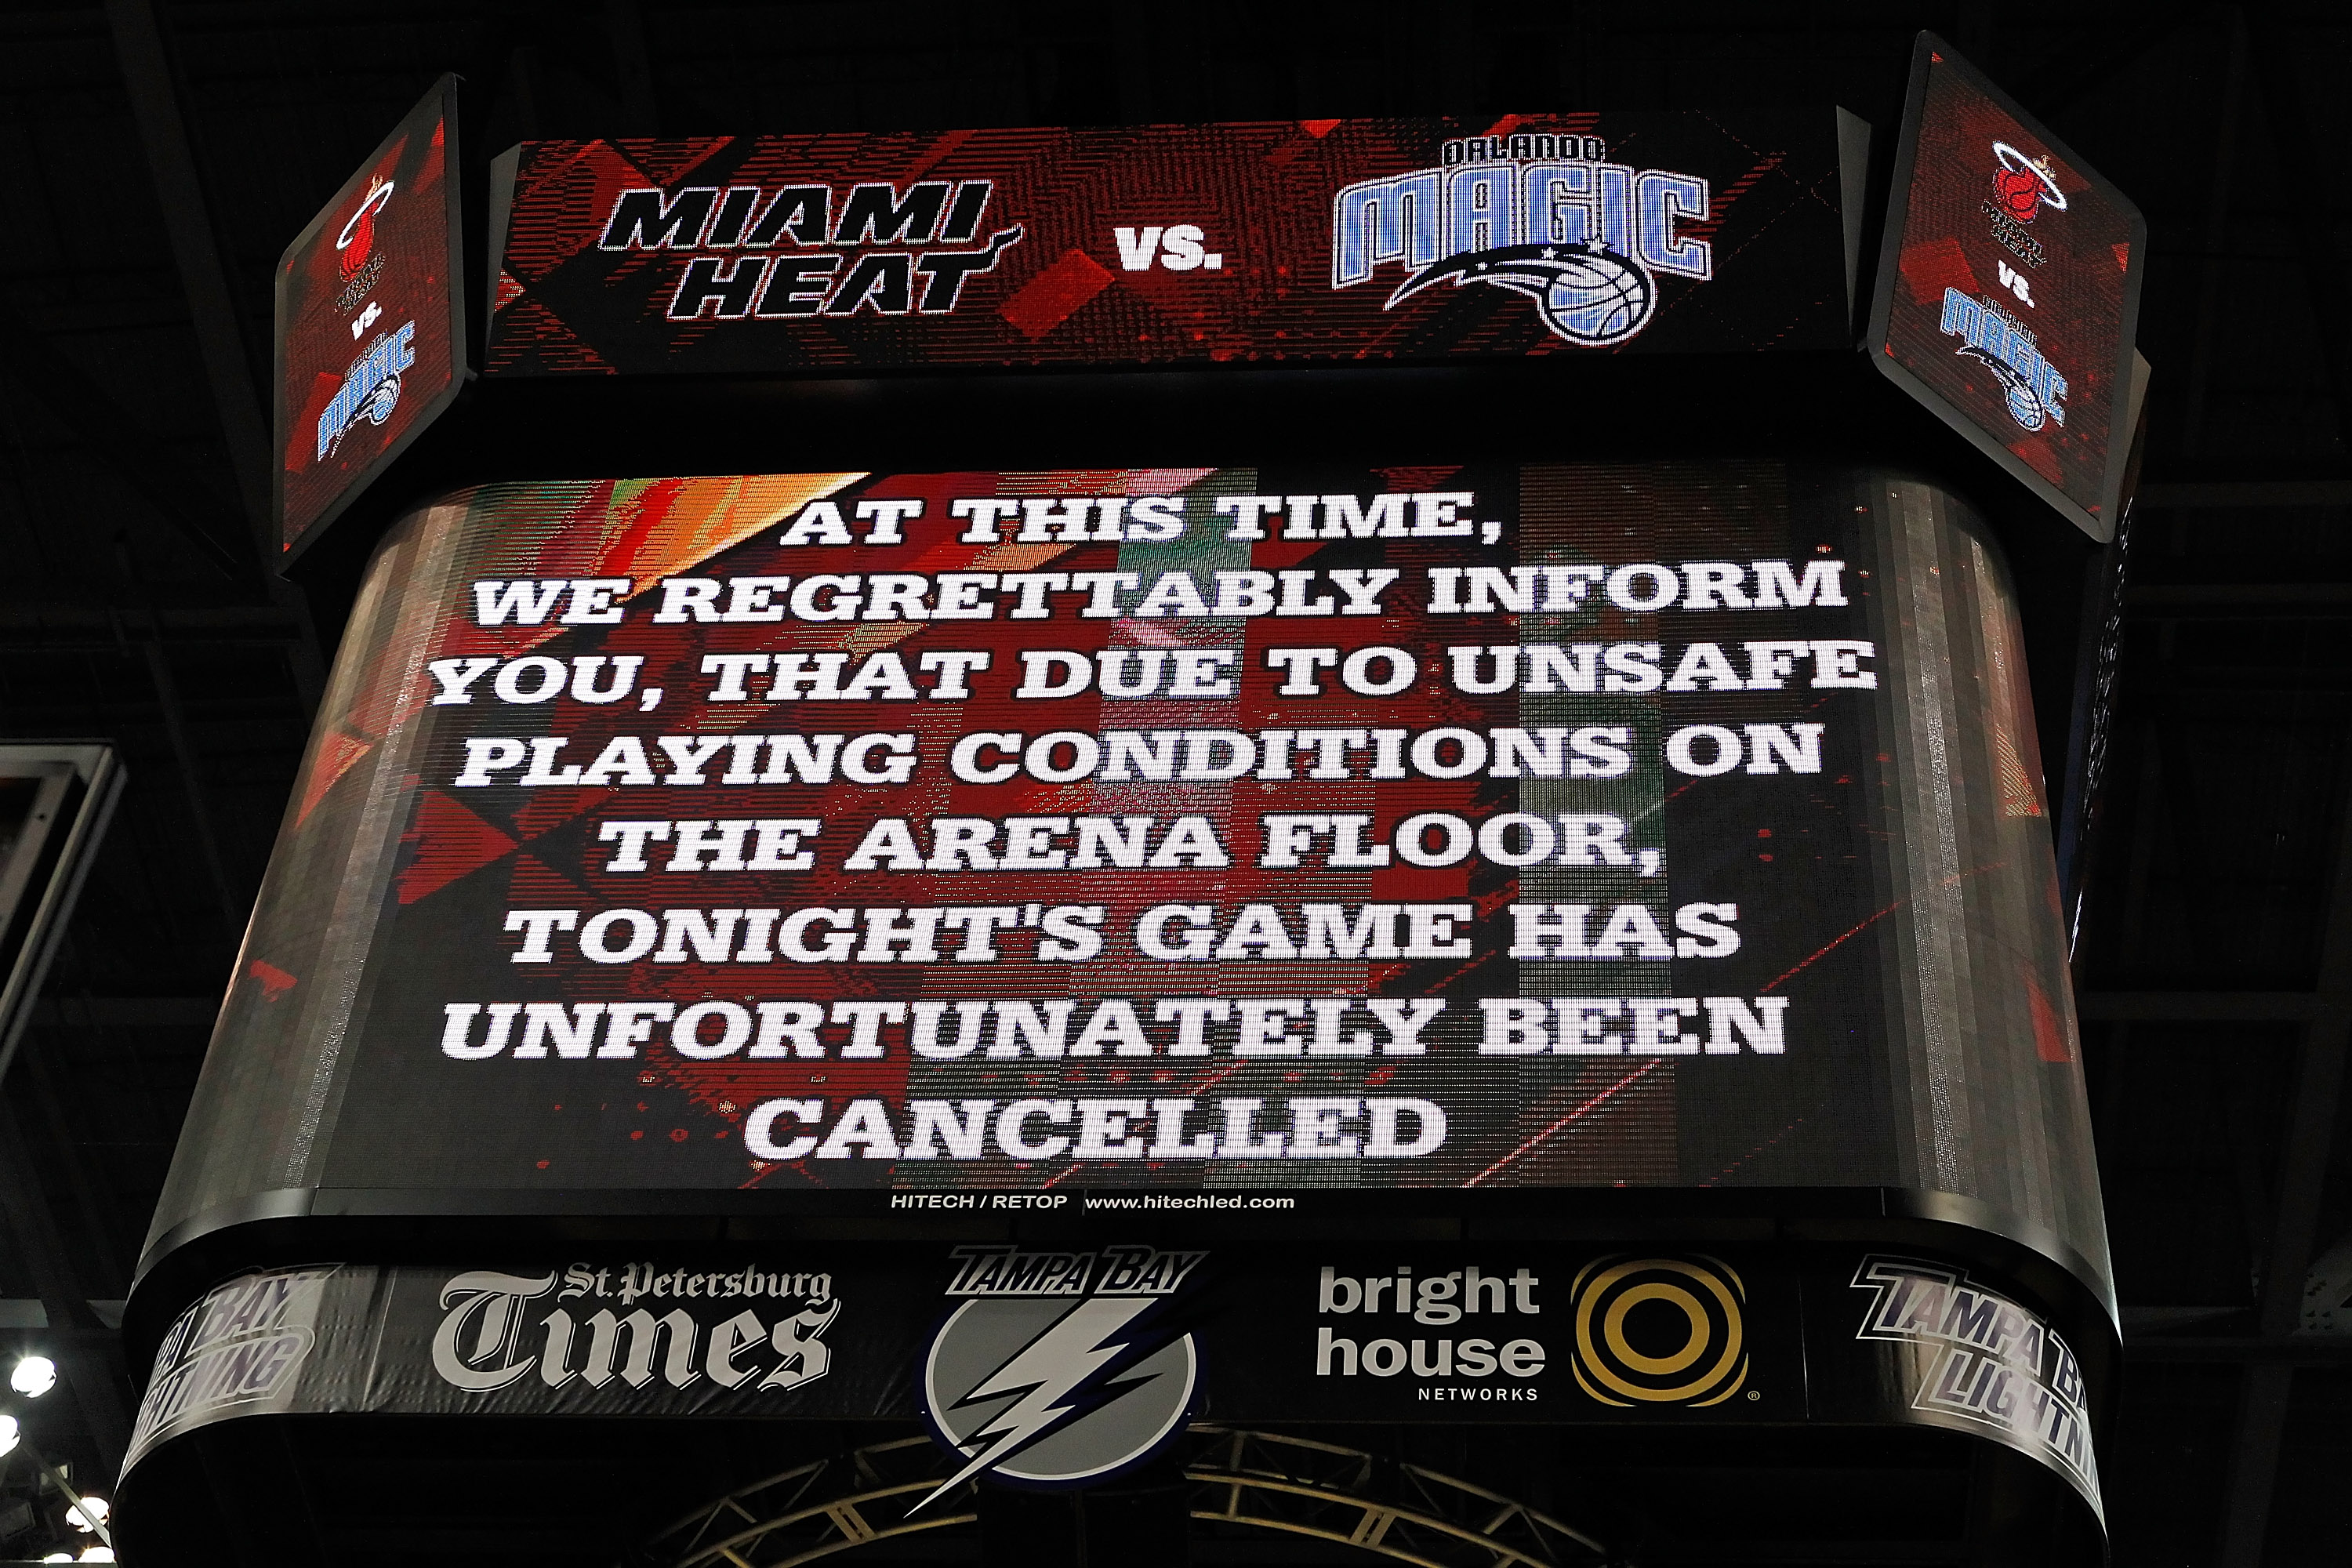 TAMPA, FL - OCTOBER 22:  The scoreboard notifying fans that the game between the Miami Heat and the Orlando Magic was cancelled at the St. Pete Times Forum on October 22, 2010 in Tampa, Florida.  NOTE TO USER: User expressly acknowledges and agrees that, 